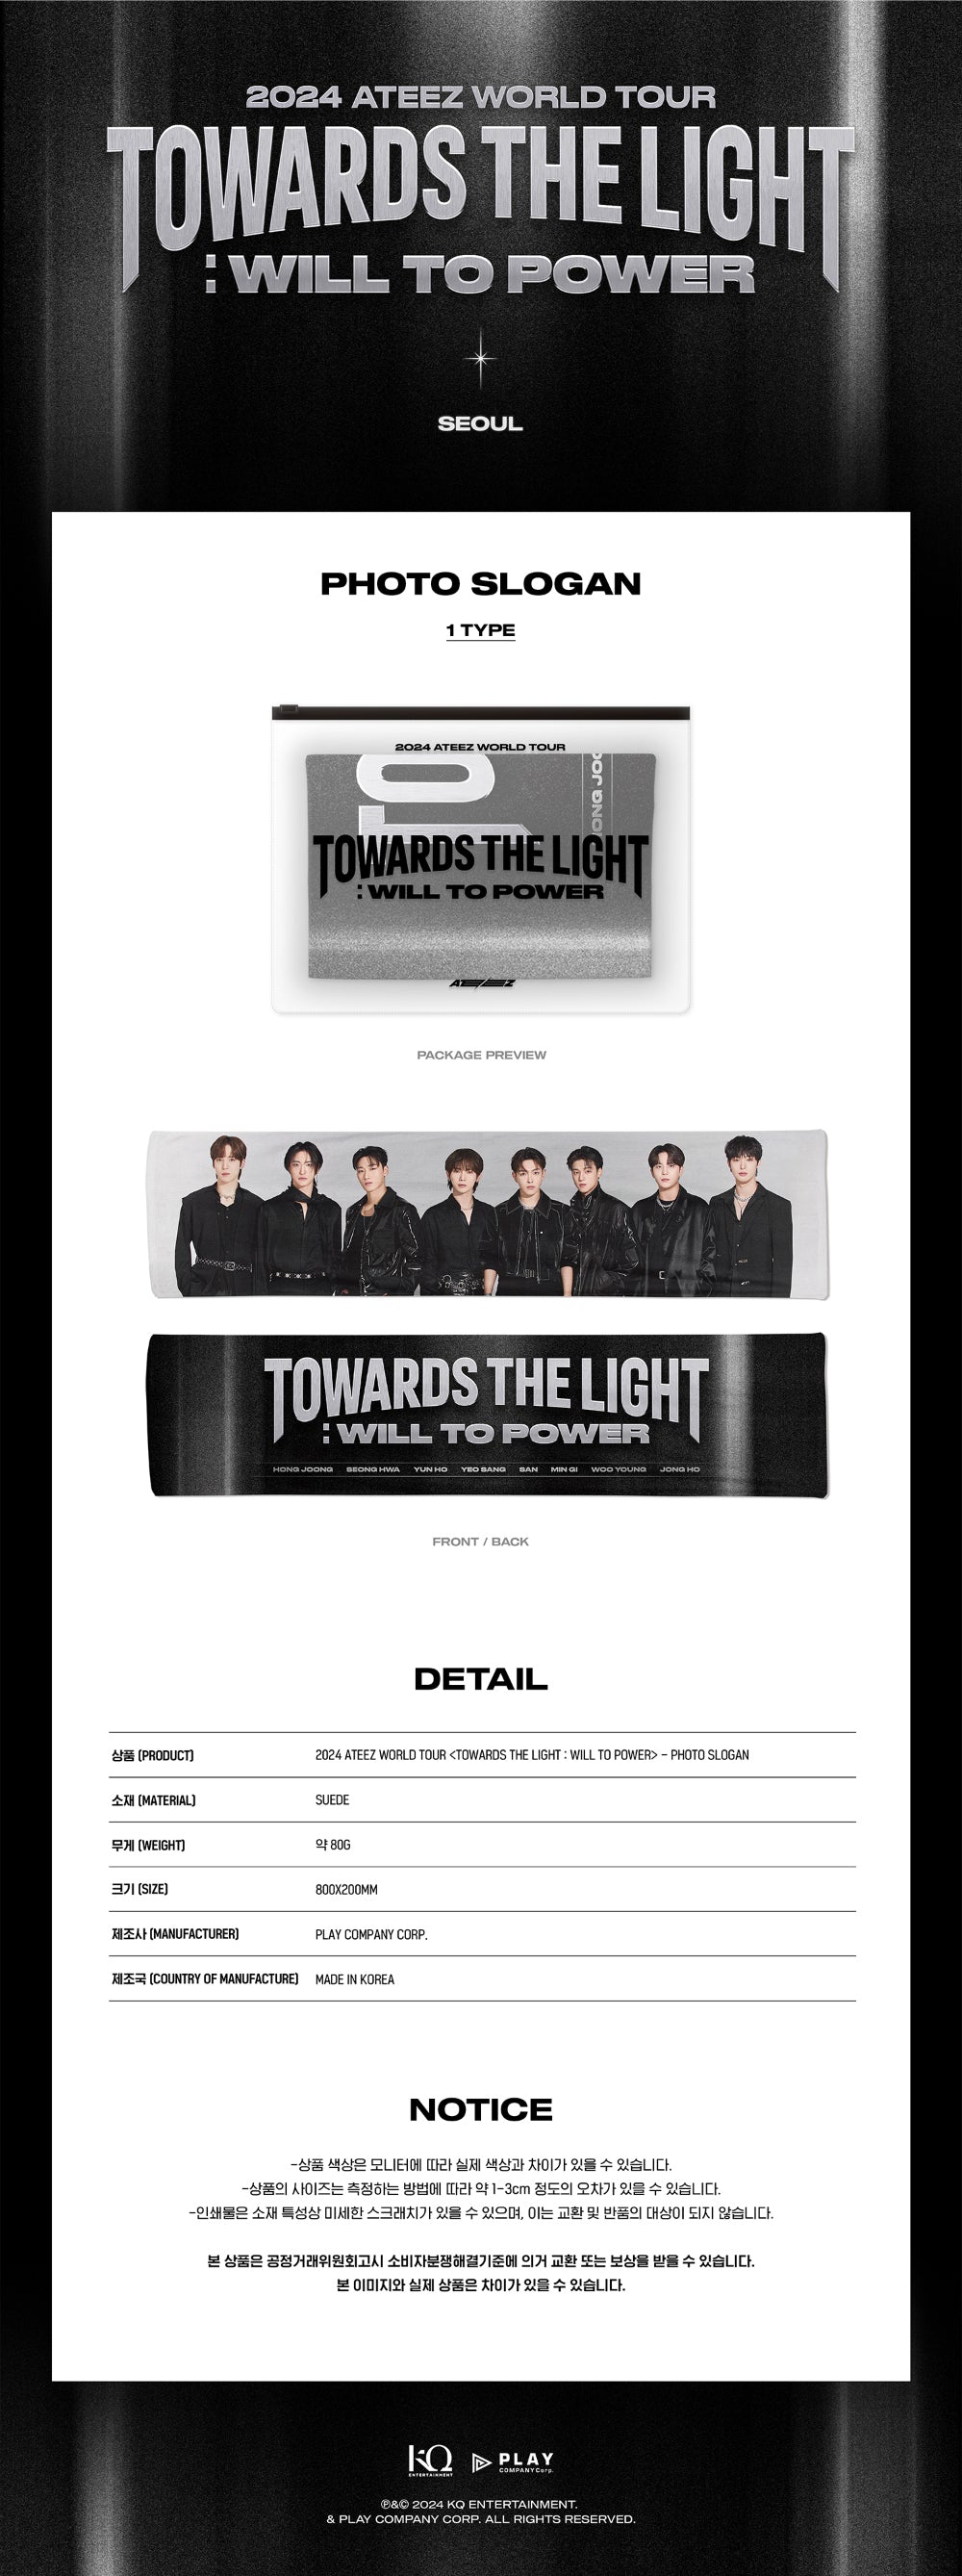 ATEEZ TOWARDS THE LIGHT: WILL TO POWER OFFICIAL MD – Kpop Omo